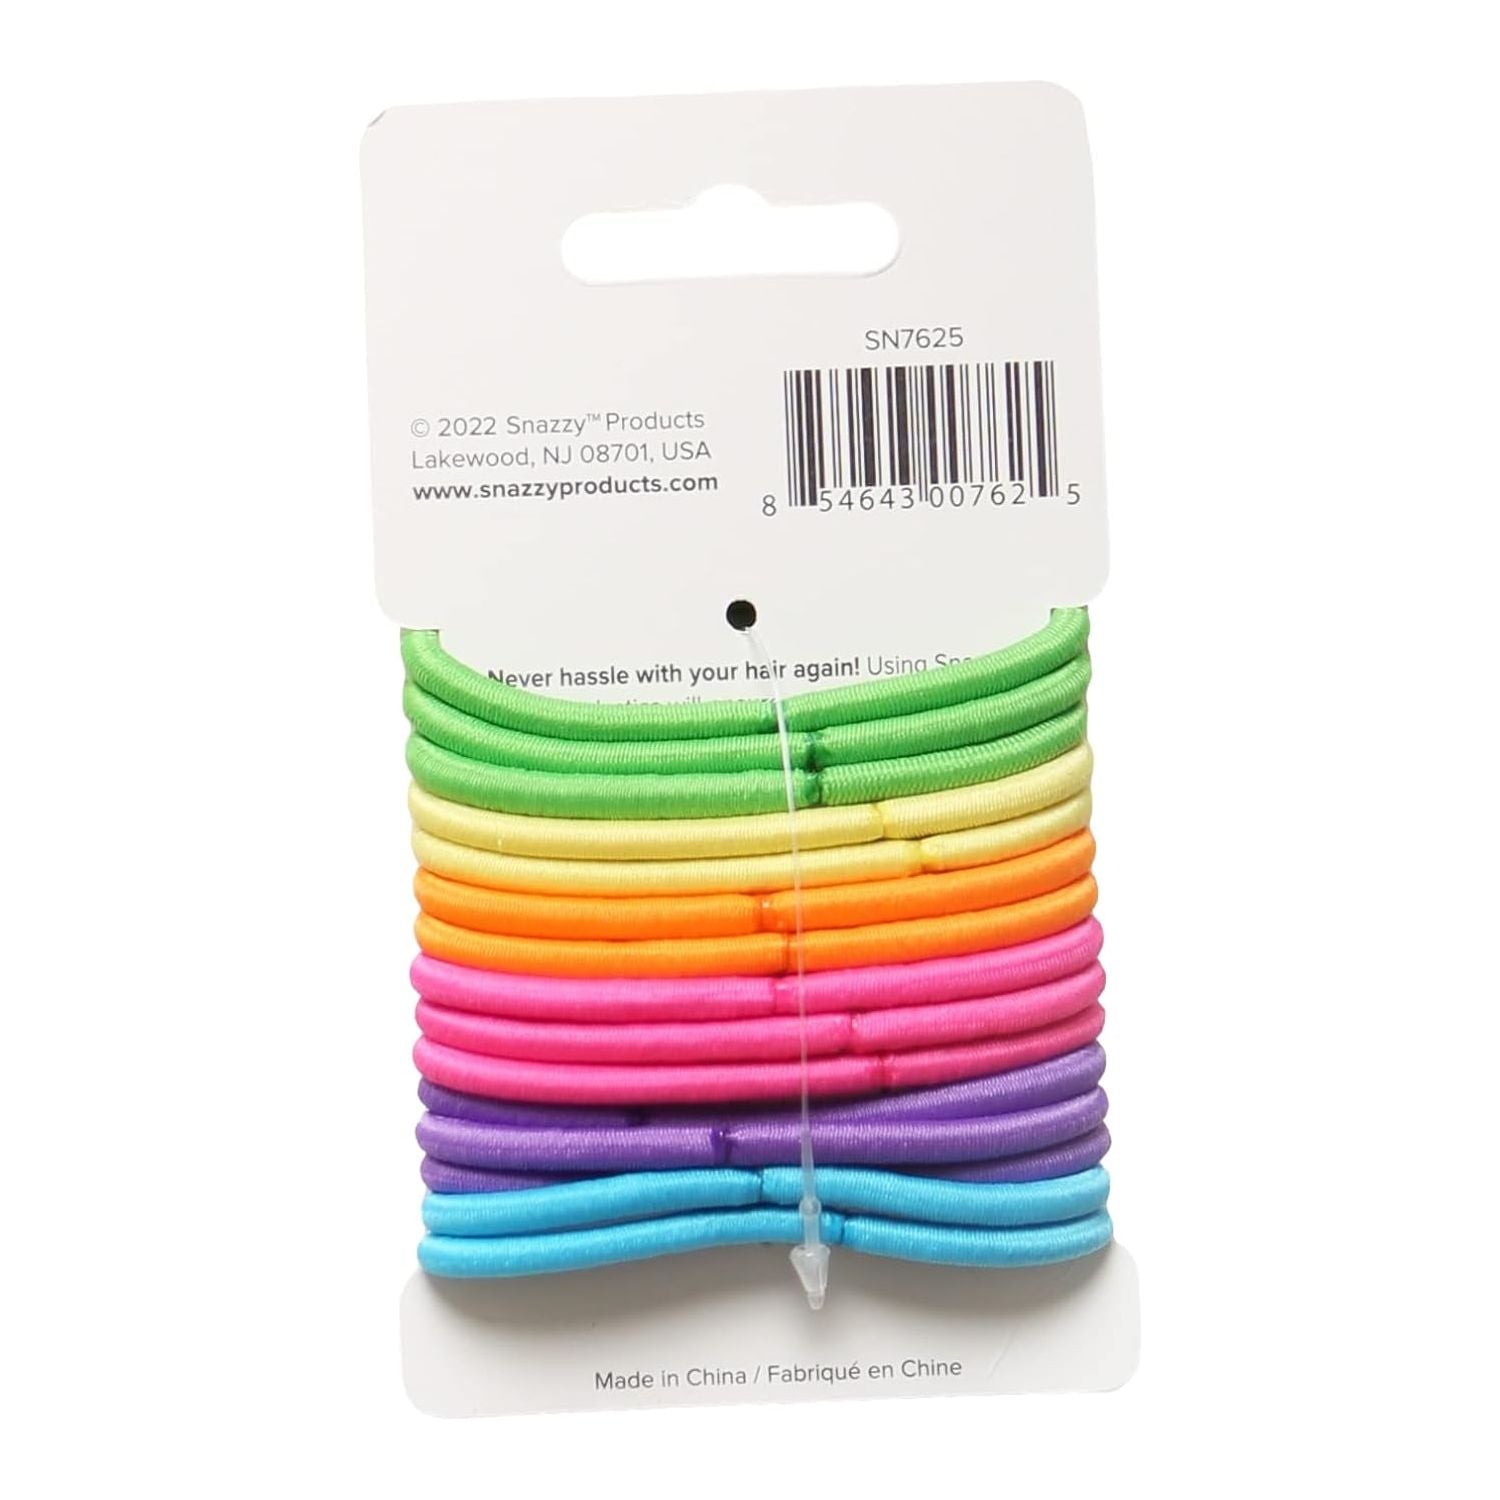 Neon Hair Bands Thick & Soft, Painless with No Damage Hair Elastics Ties